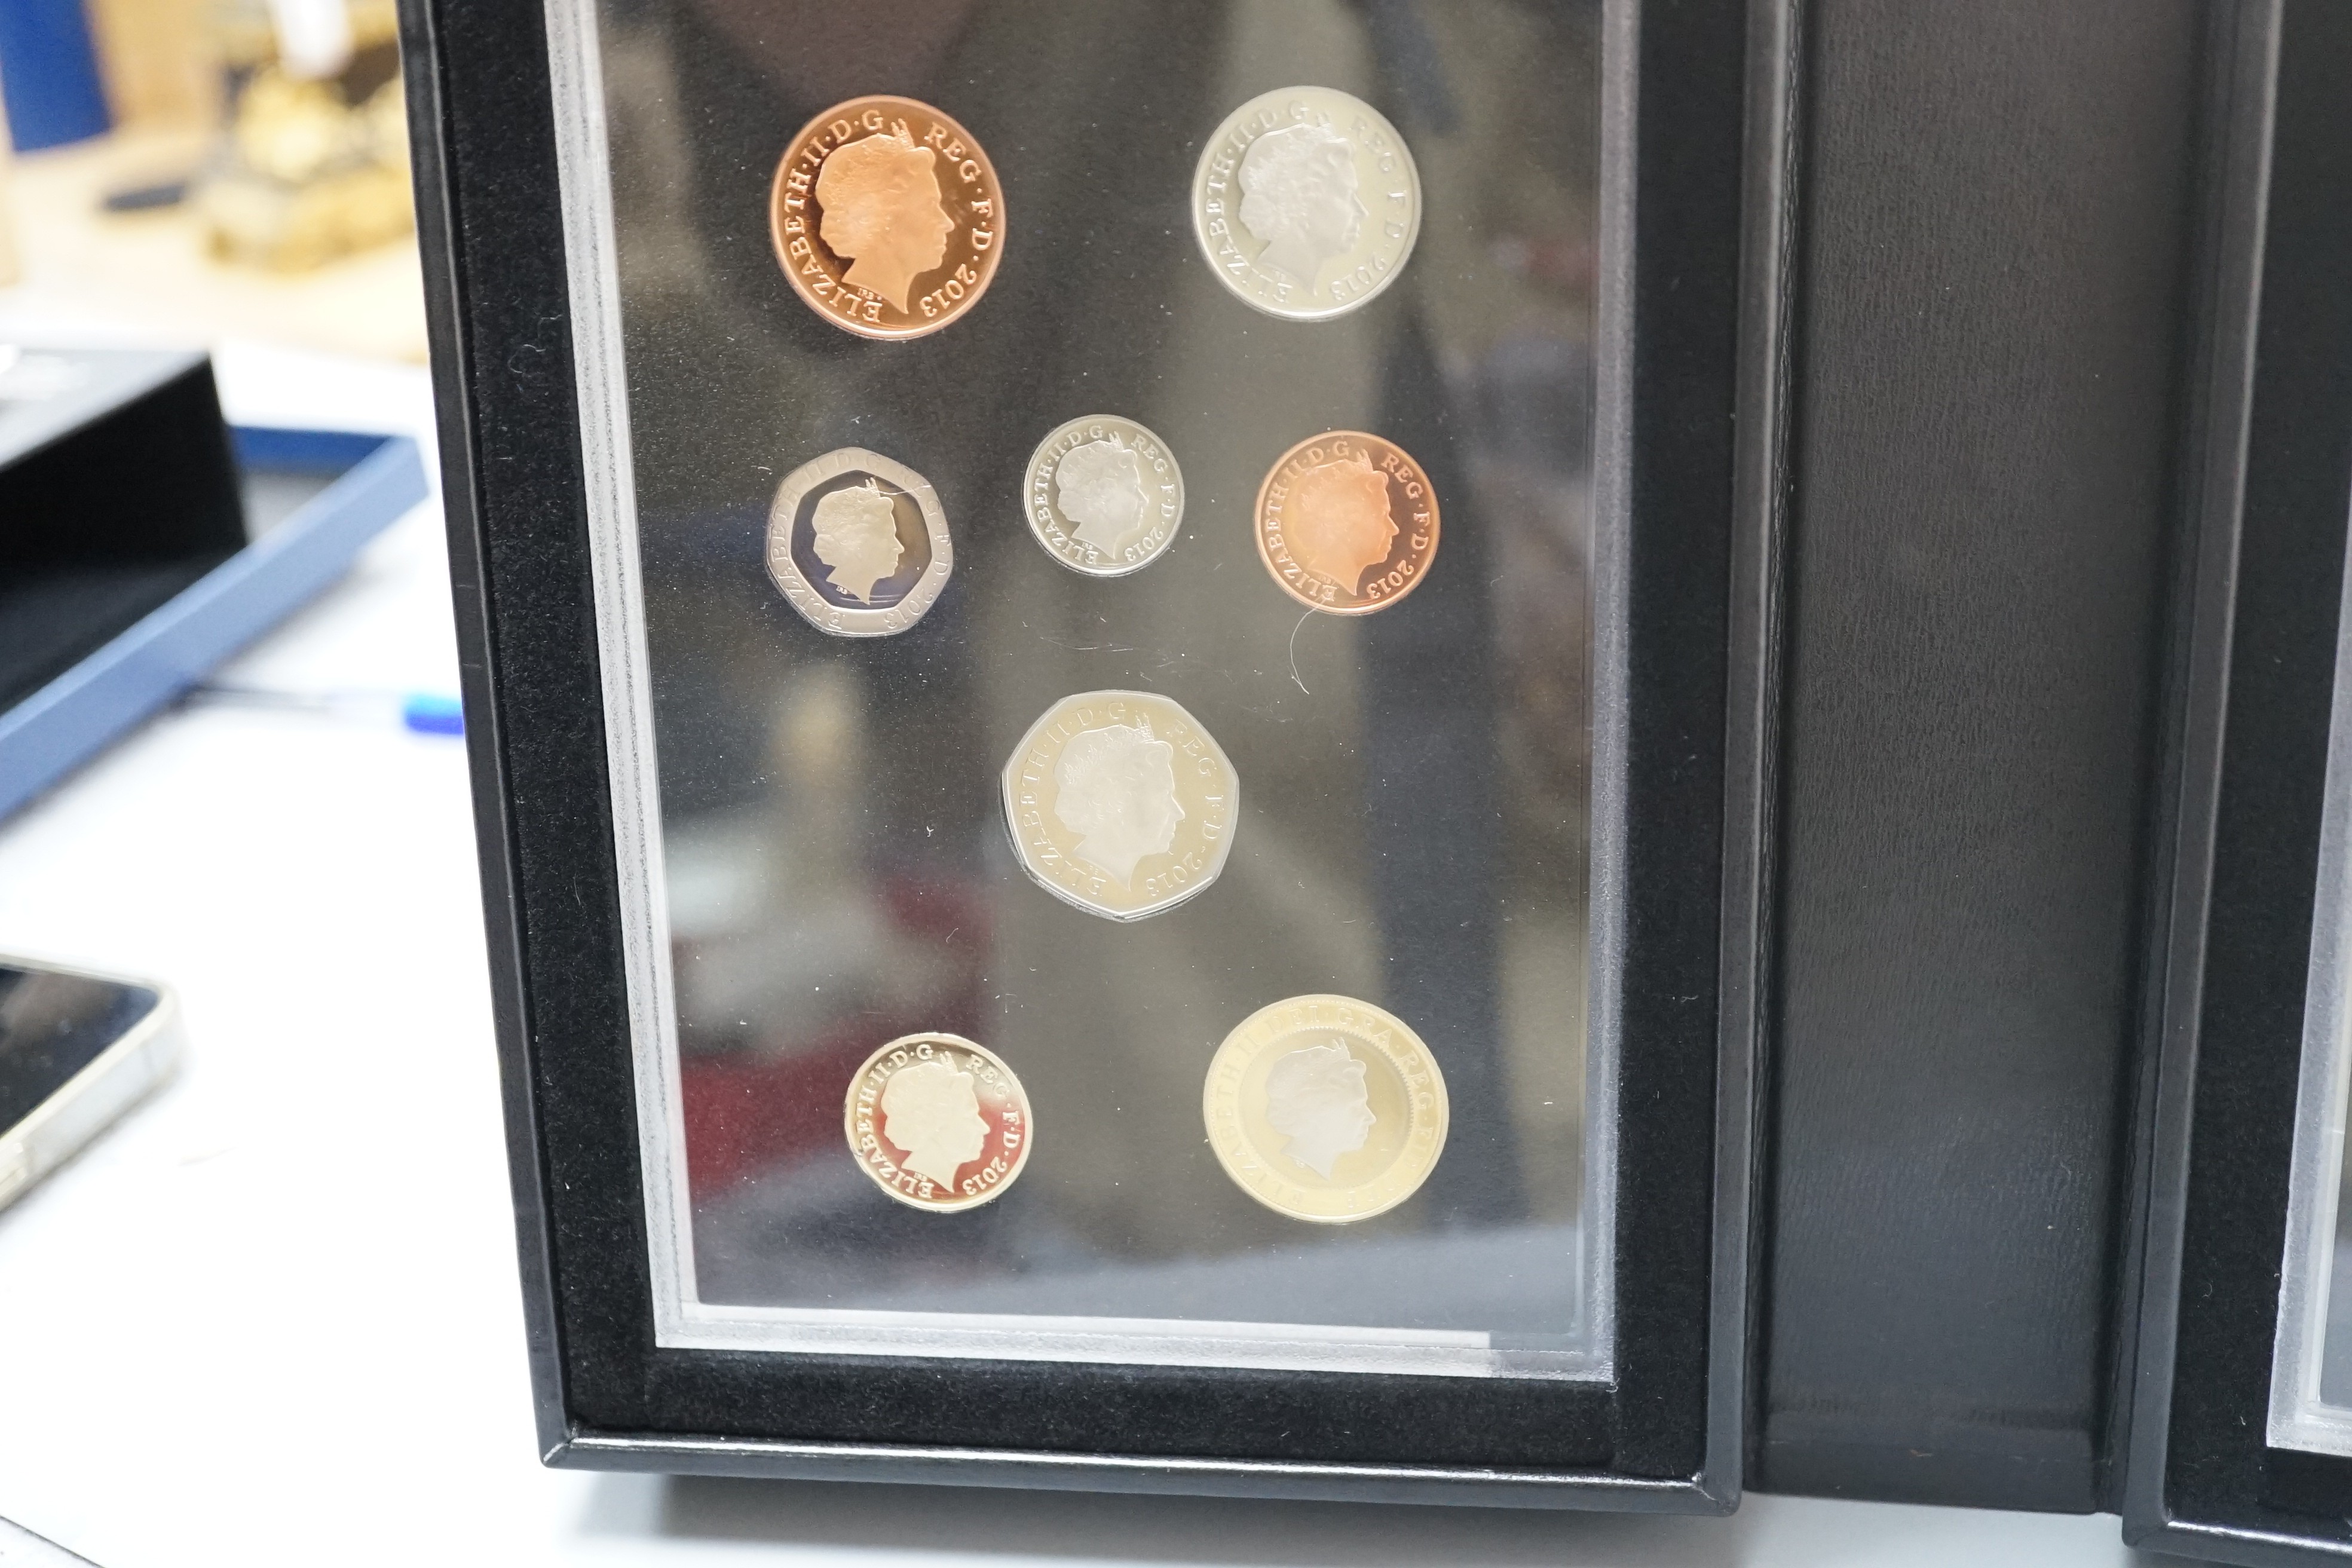 Two cased Royal Mint proof silver coin sets – 2007 Family Silver Collection six coin set and 2013 Collector Edition fifteen coin set